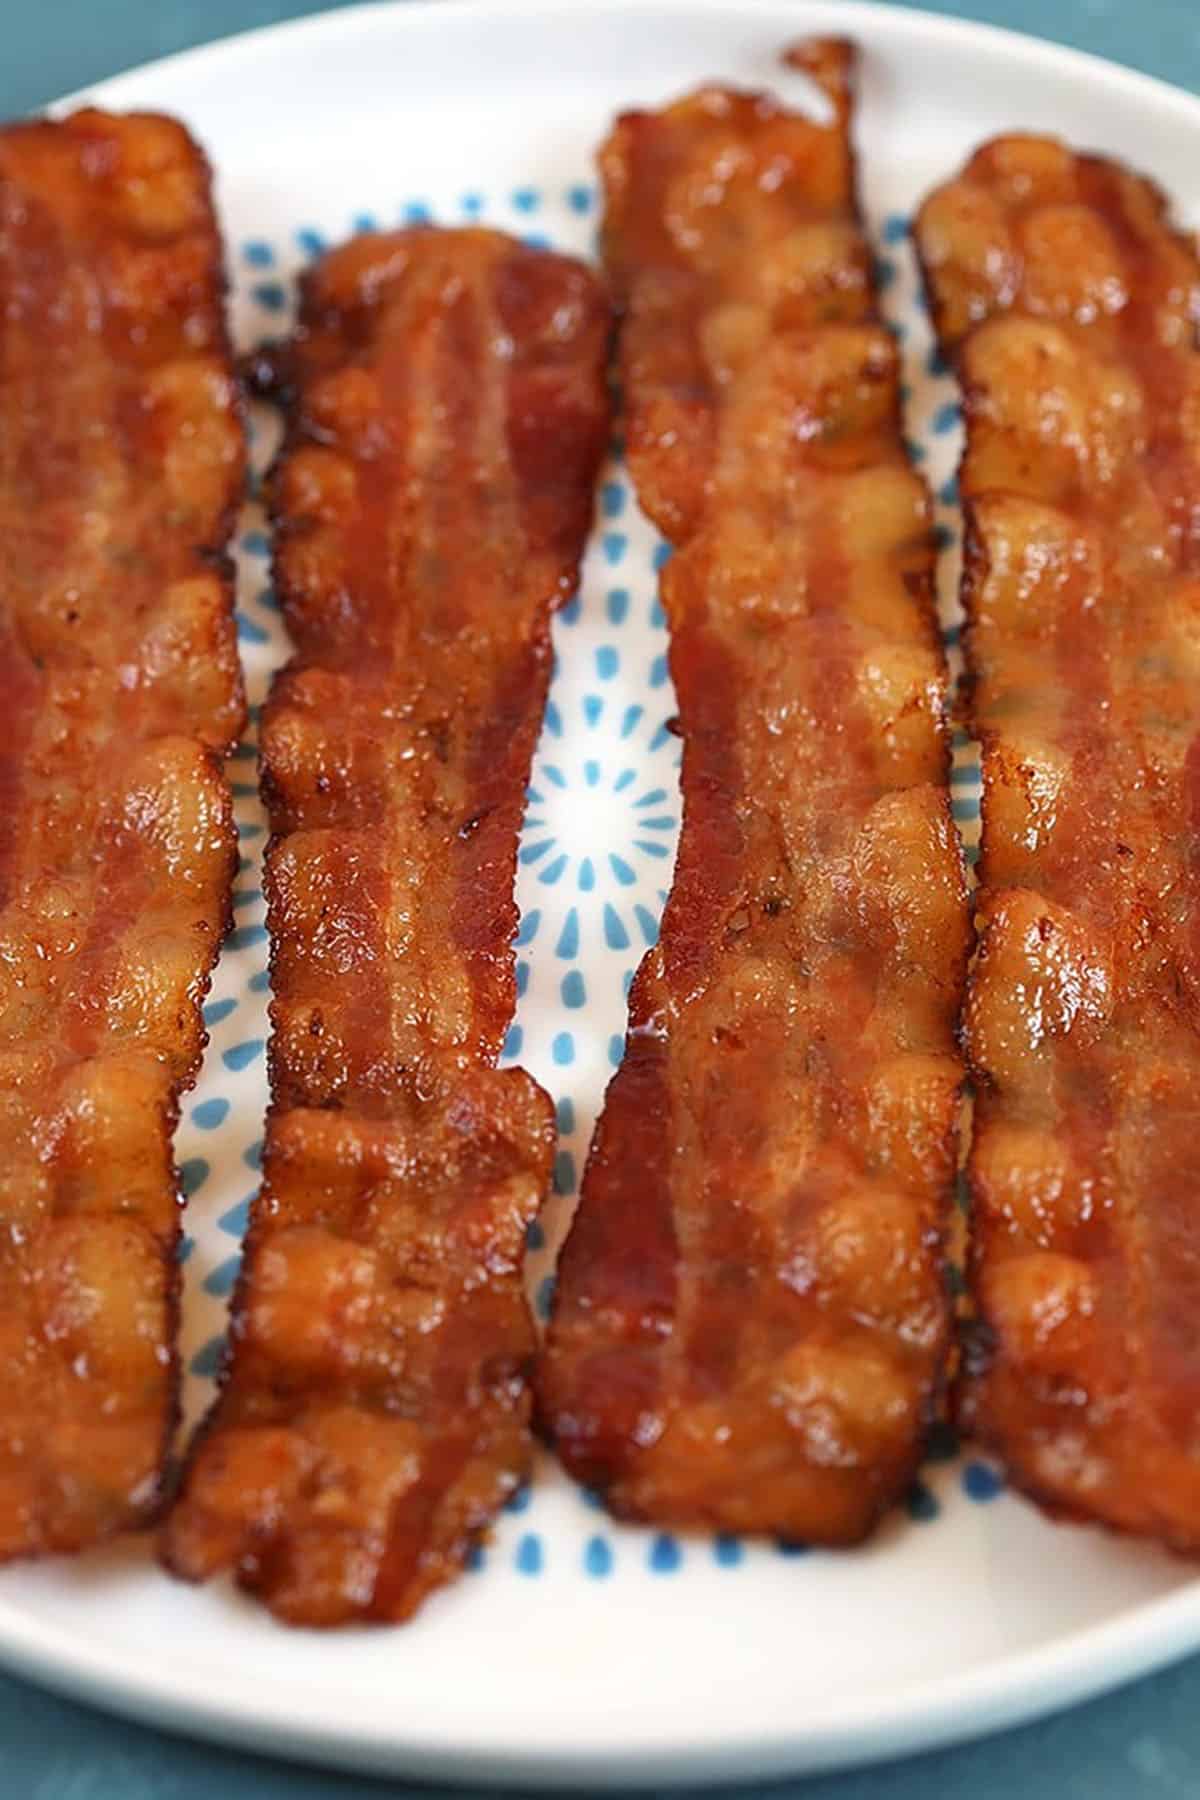 Four sliced of bacon on a white plate with blue dots.